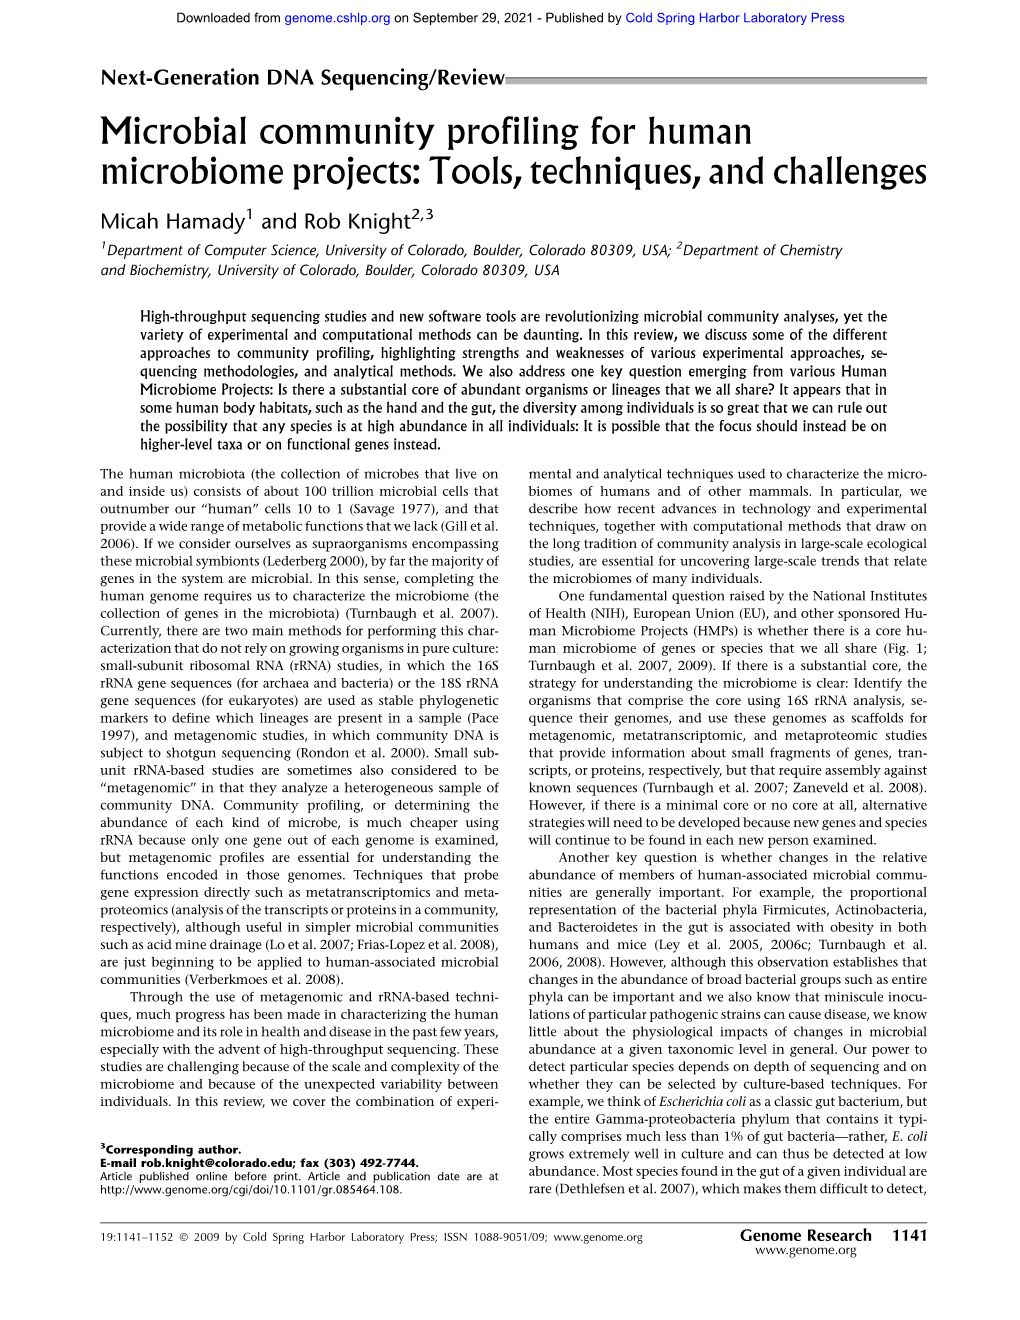 Microbial Community Profiling for Human Microbiome Projects: Tools, Techniques, and Challenges